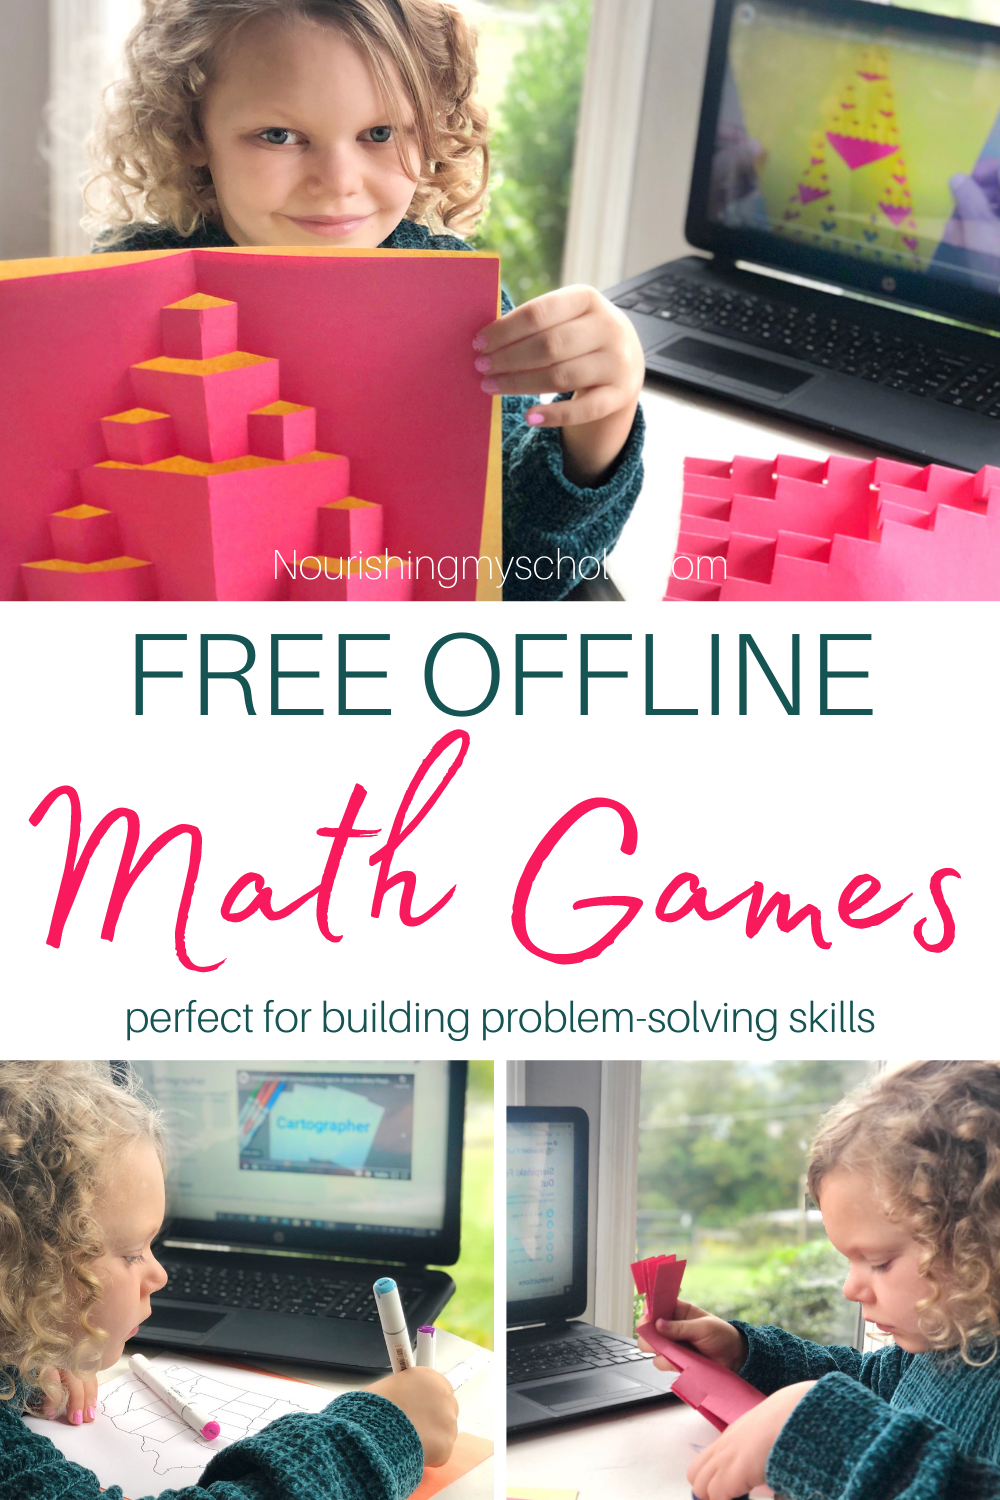 Free Offline Math Games Perfect for Building Problem-Solving Skills: Are you looking for a FREE math game resource that makes math fun and exciting? How about math games that focus on critical thinking and problem-solving skills. If you want to help facilitate and nurture a math-rich education, then Beast Academy Playground is a fantastic option for getting your kids thinking outside the box. #BeastAcademy #BeastAcademyPlayground #freemathgames #math #matheducation #mathforkids #mathgames